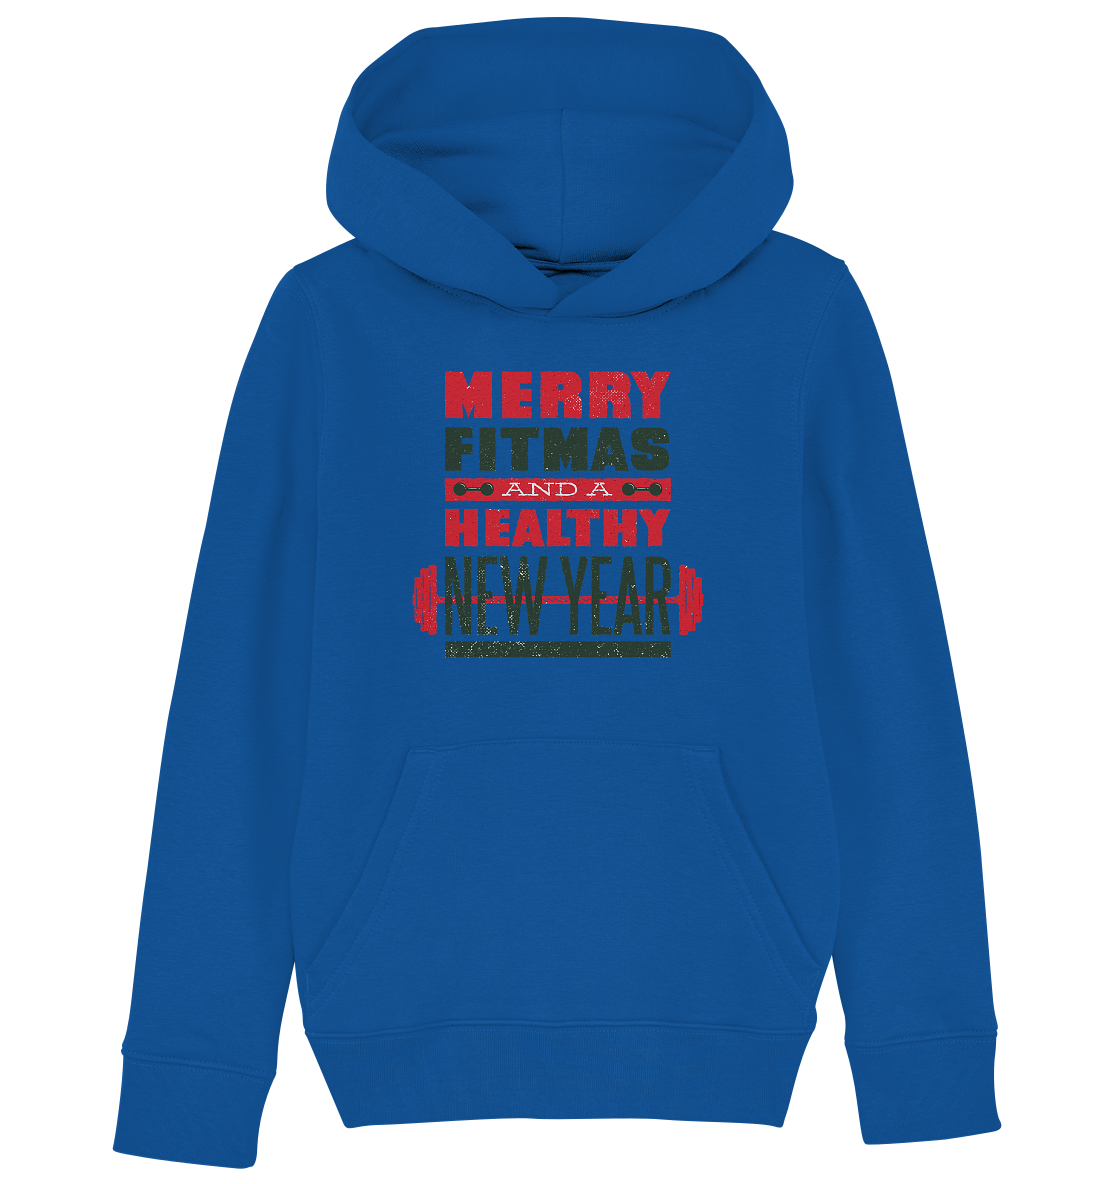 Weihnachtliches Design, Gym, Merry Fitmas and a Healthy New Year - Kids Organic Hoodie